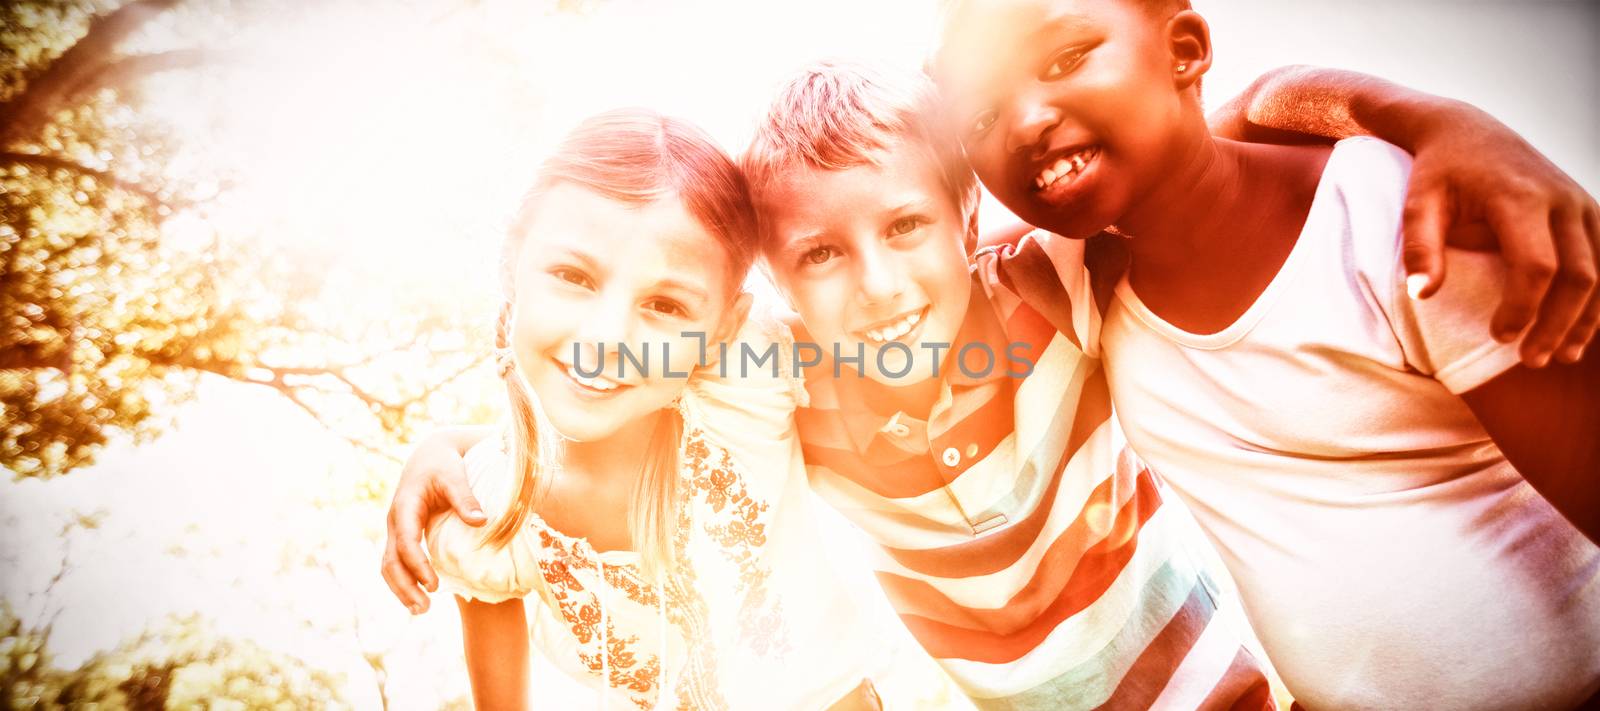 Kids posing together during a sunny day at camera by Wavebreakmedia